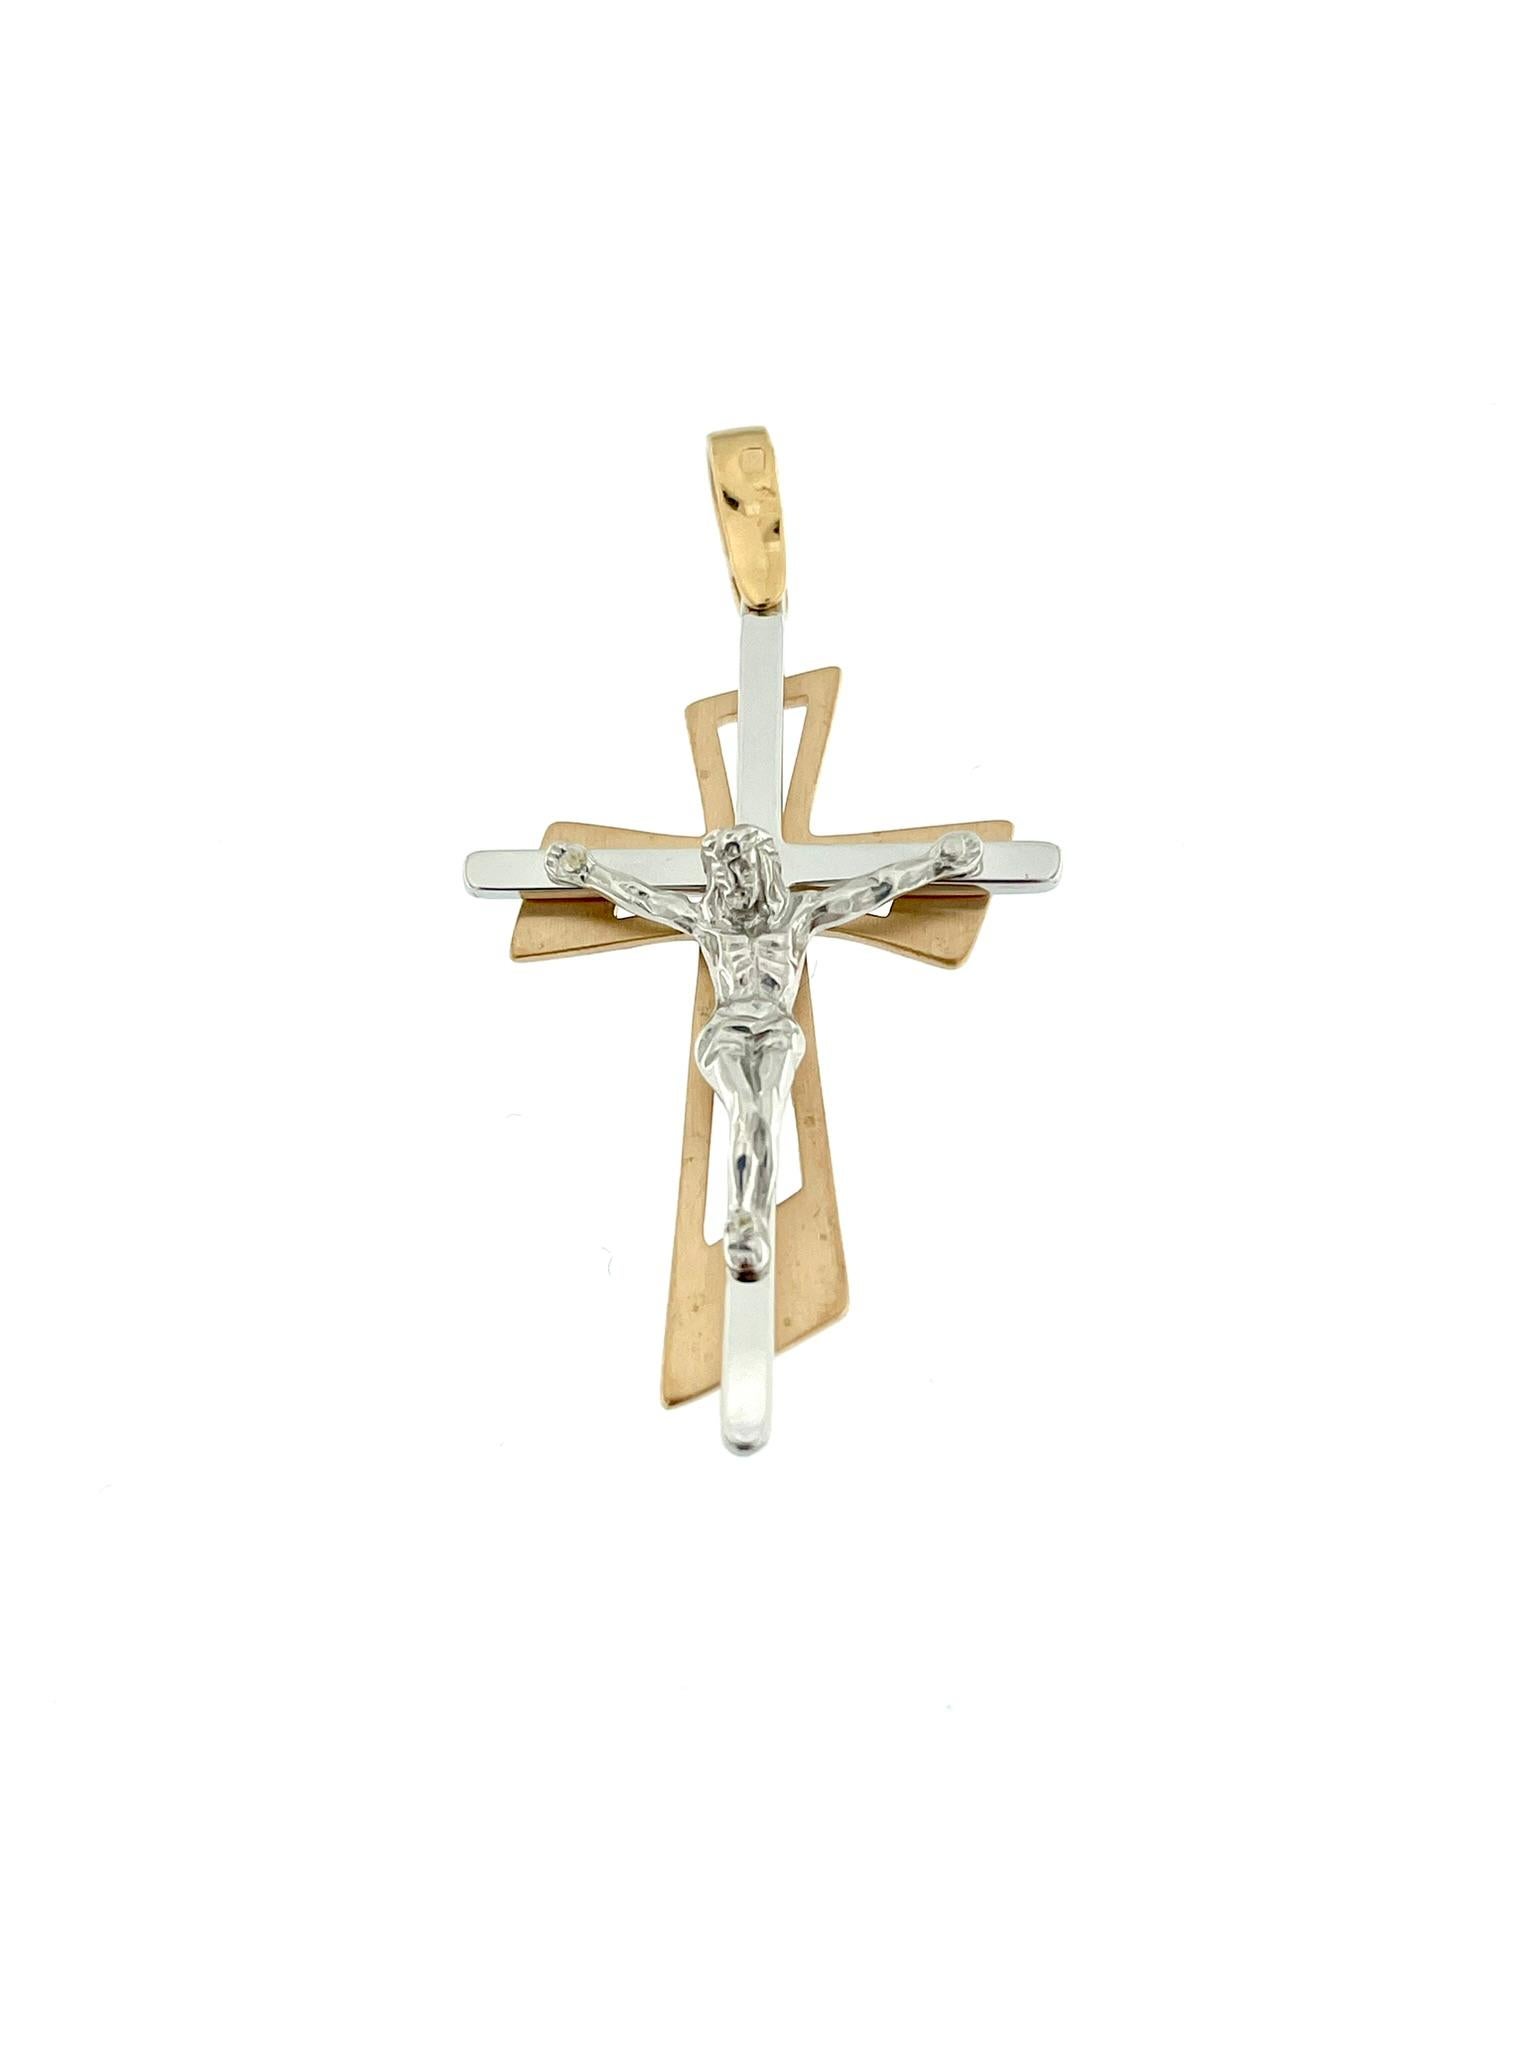 Modern French 18kt Rose and White Gold Crucifix For Sale